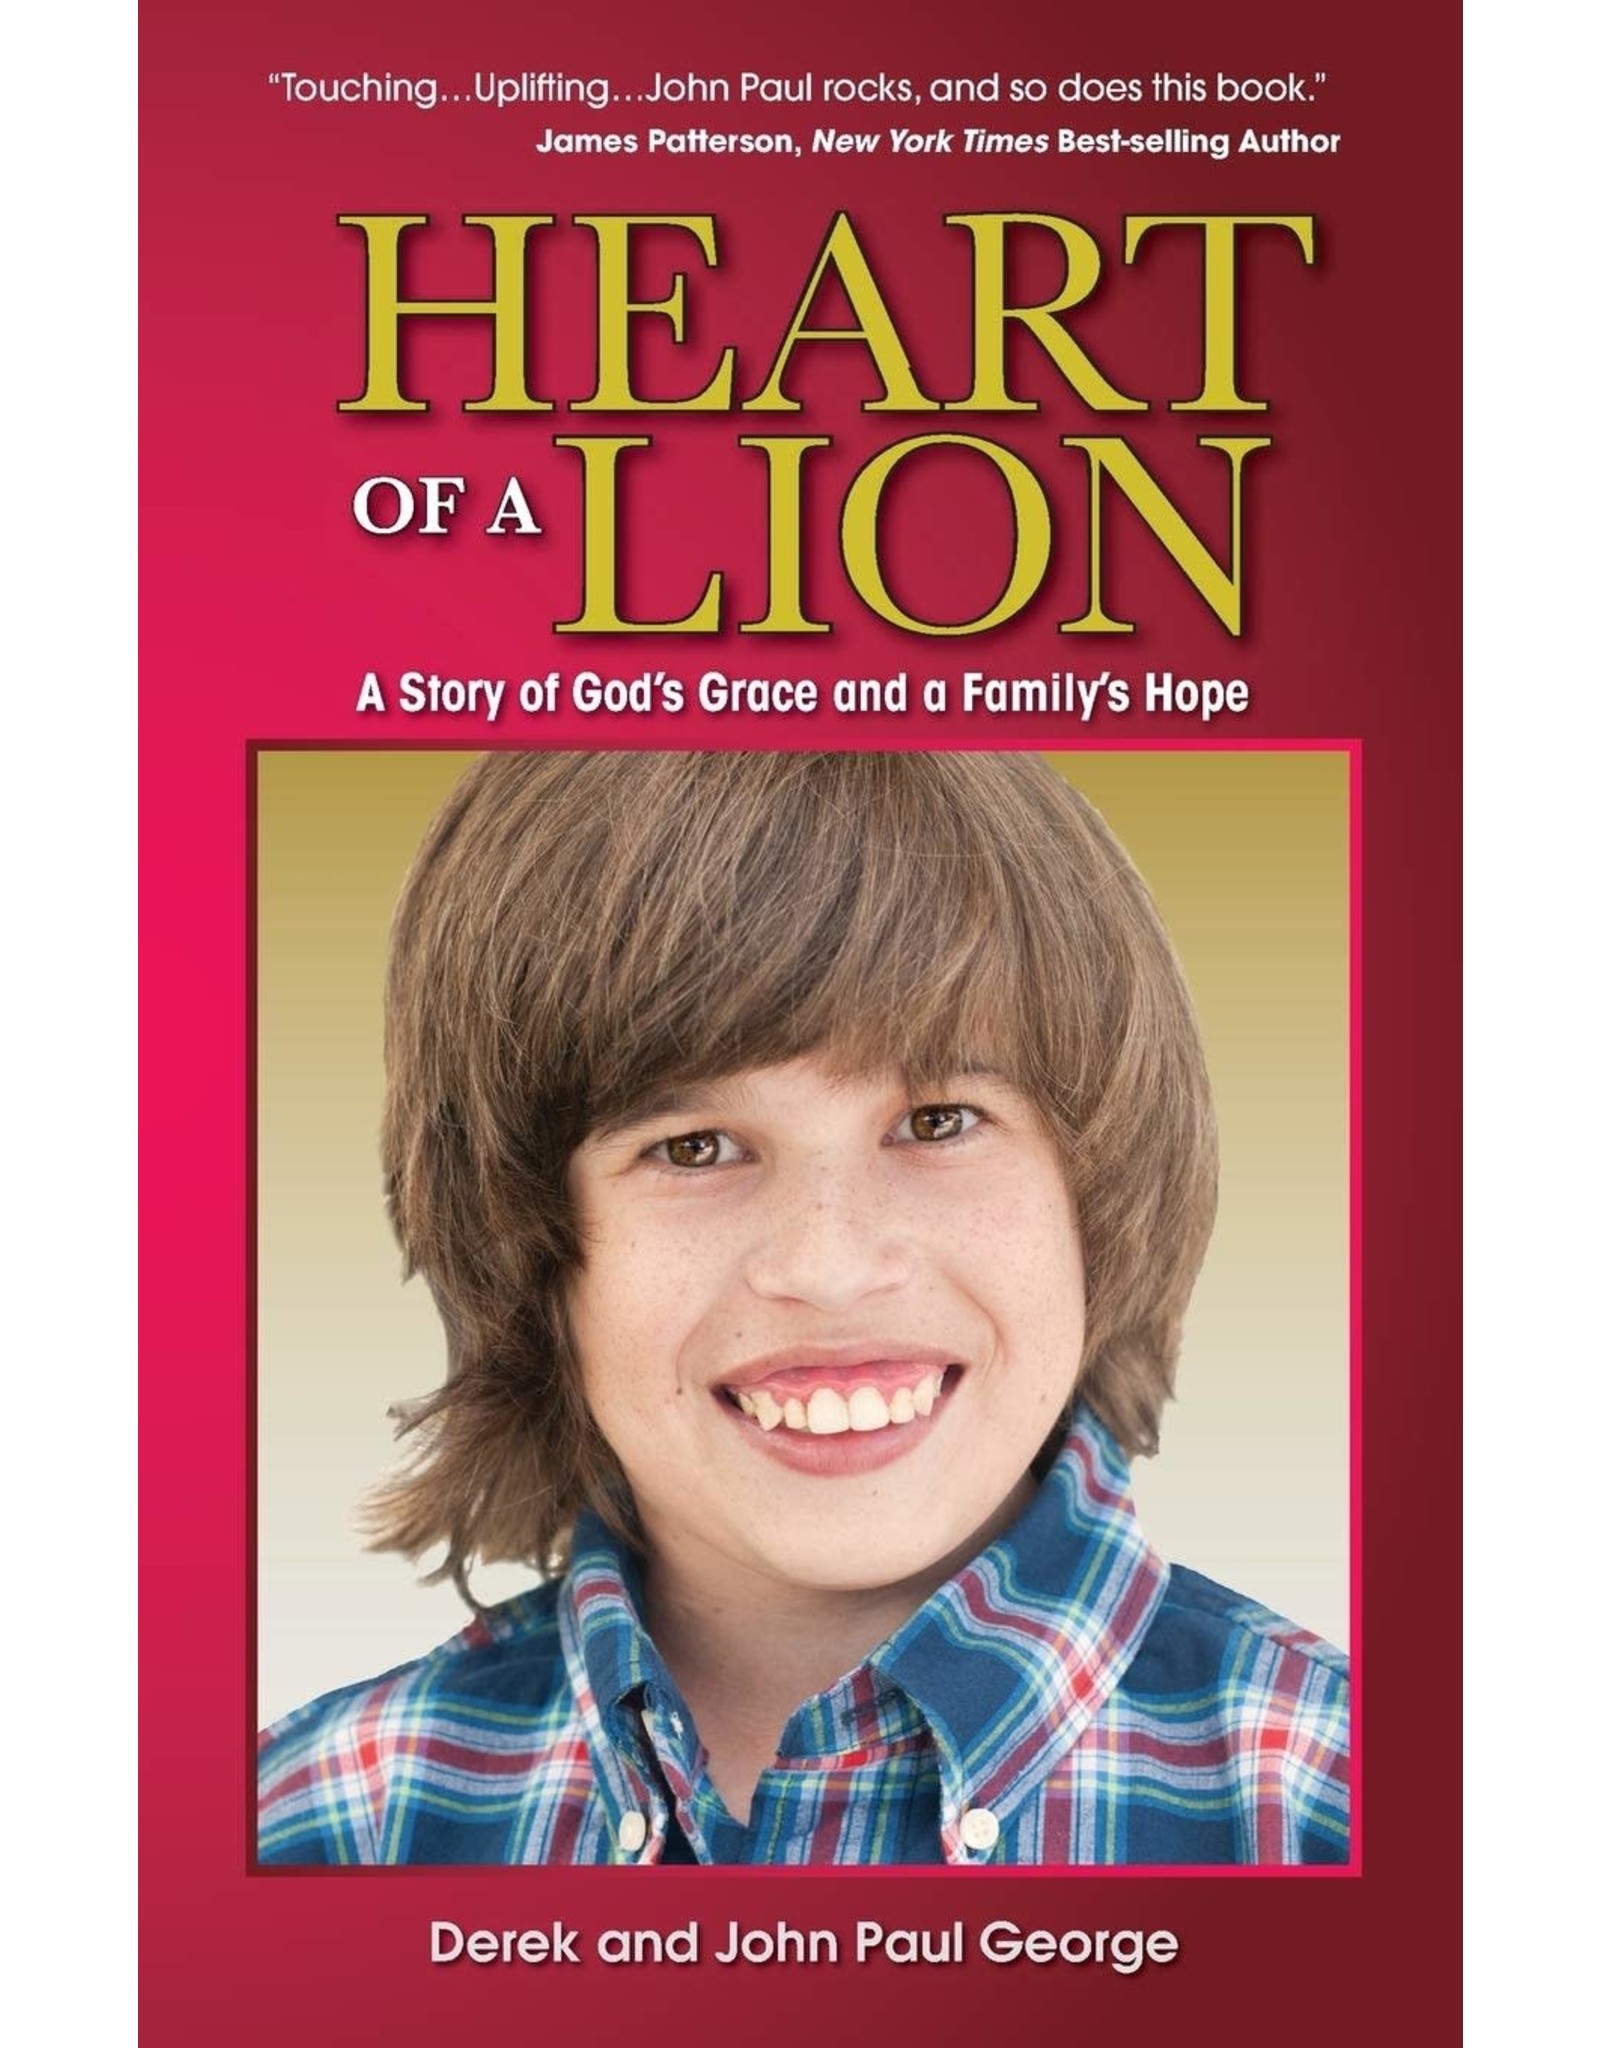 Heart of a Lion: A Story Of God's Grace and a Family's Hope